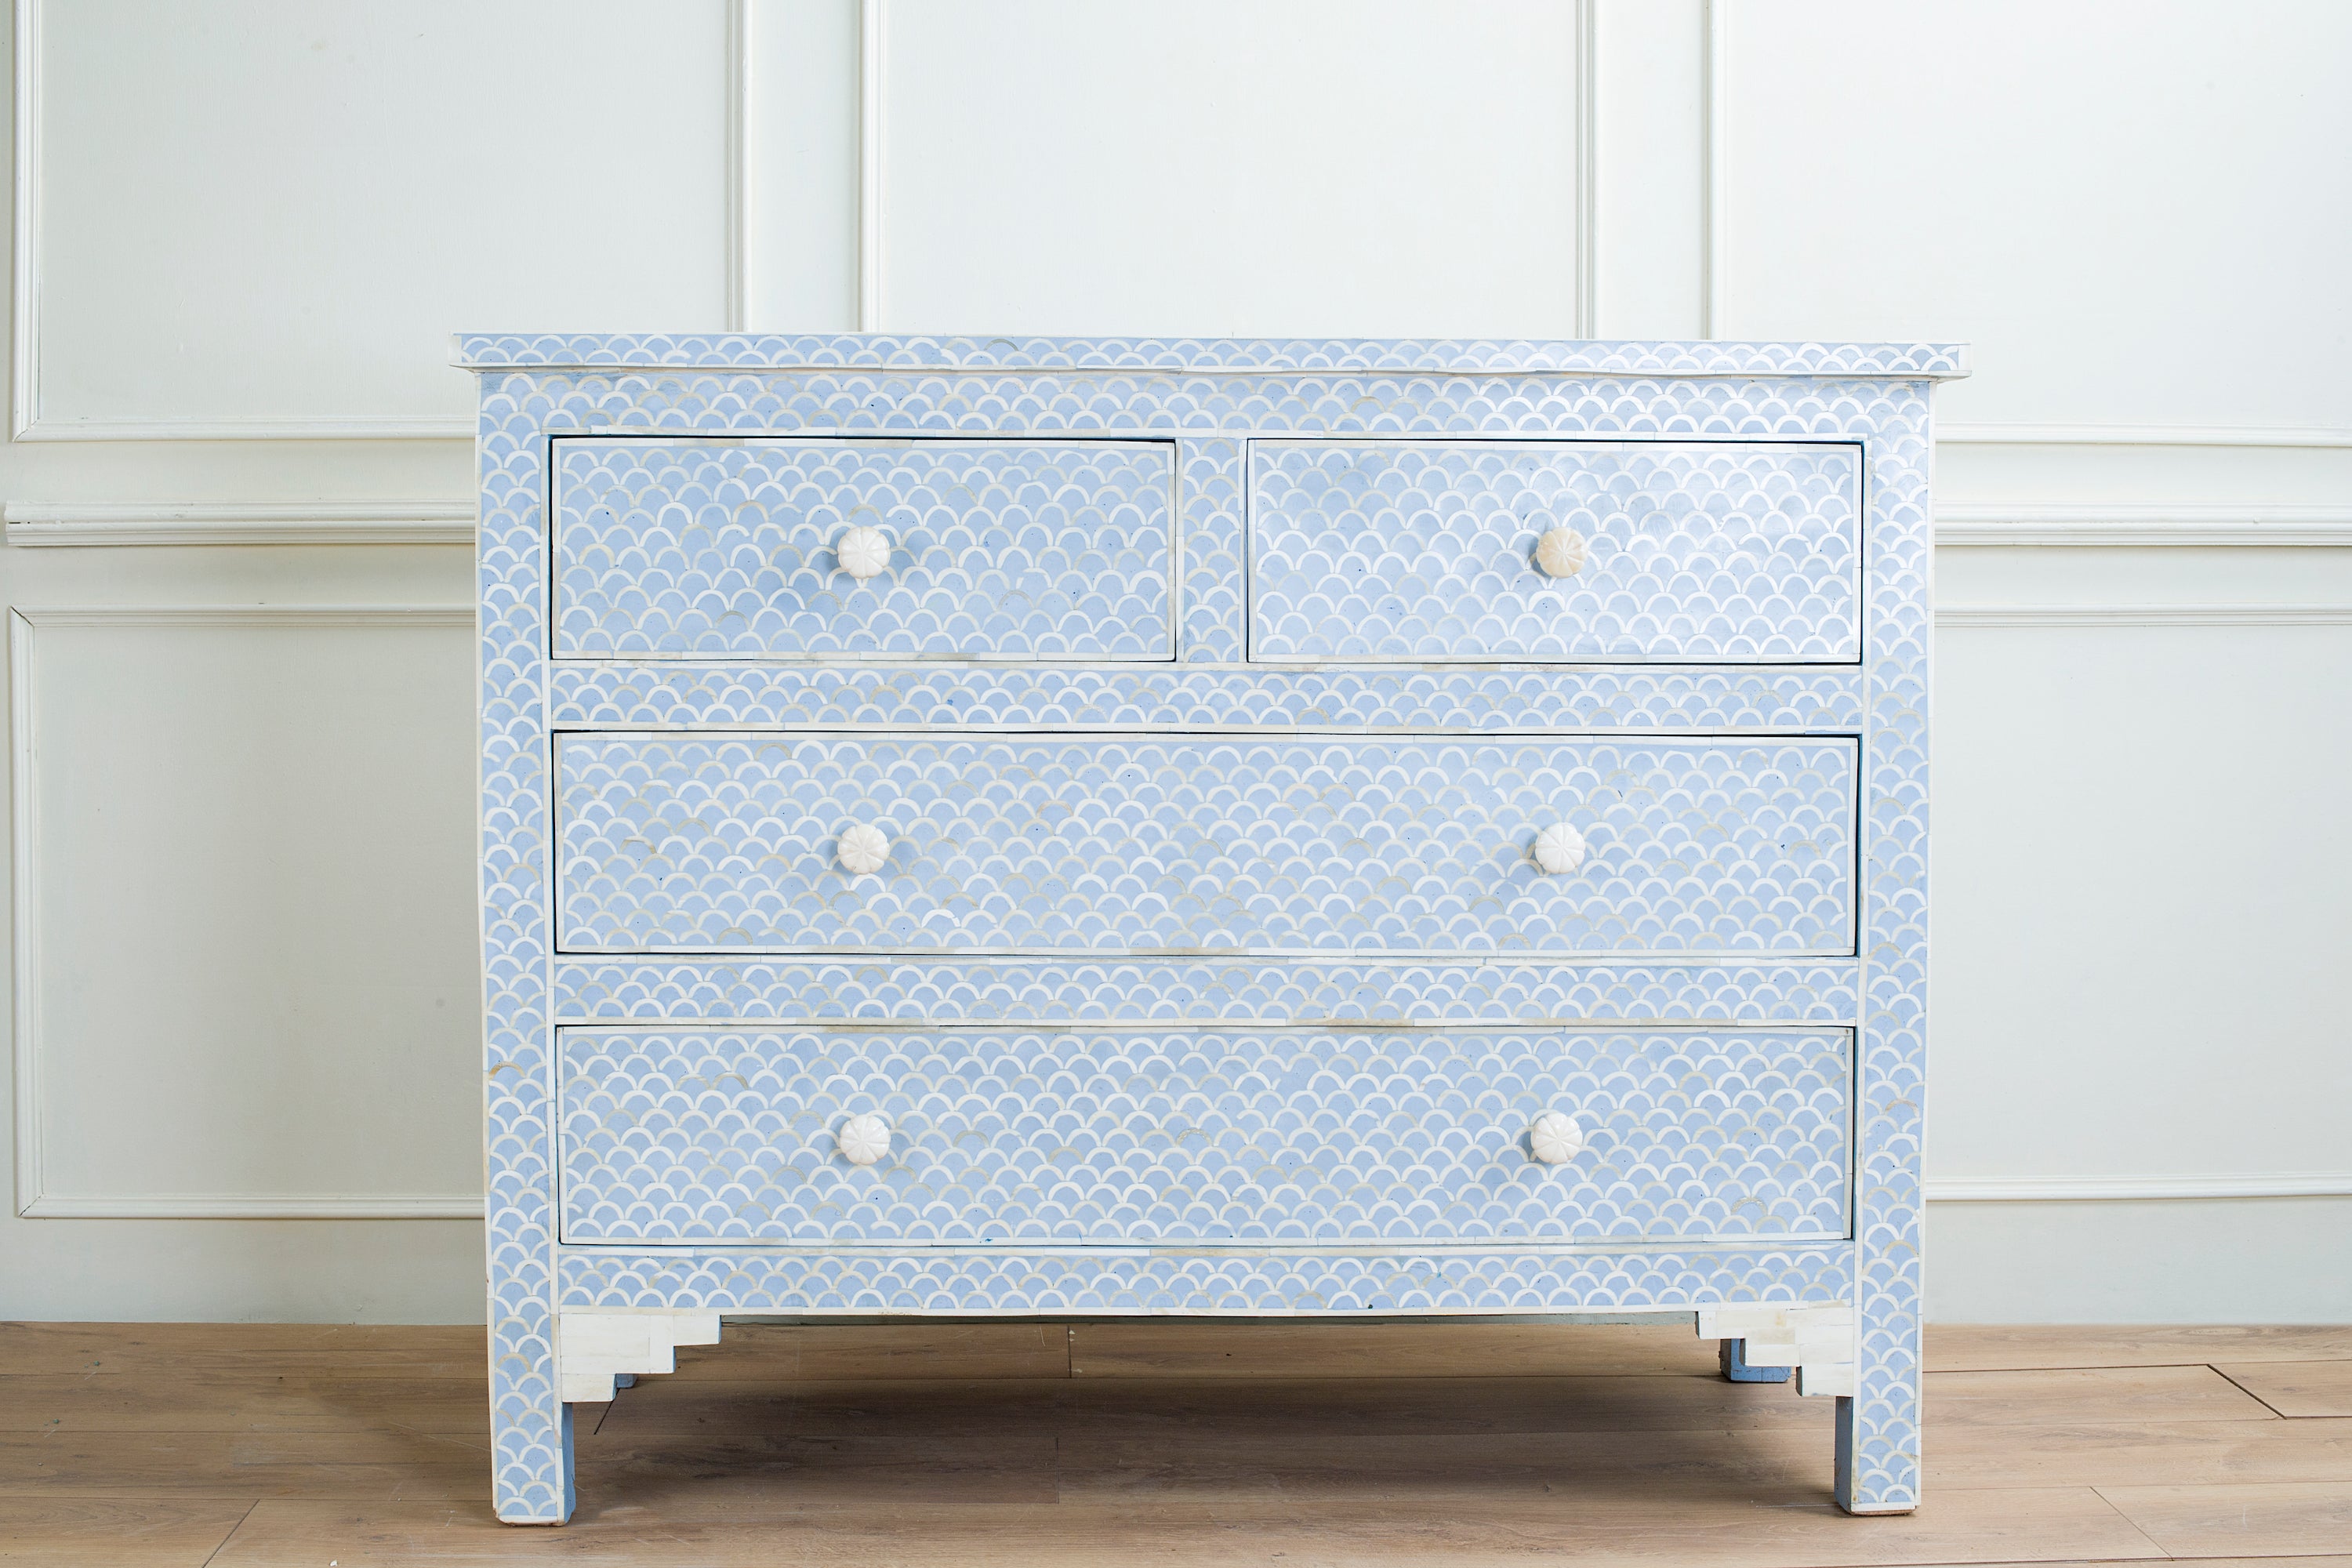 The Mauritius Chest of Drawers